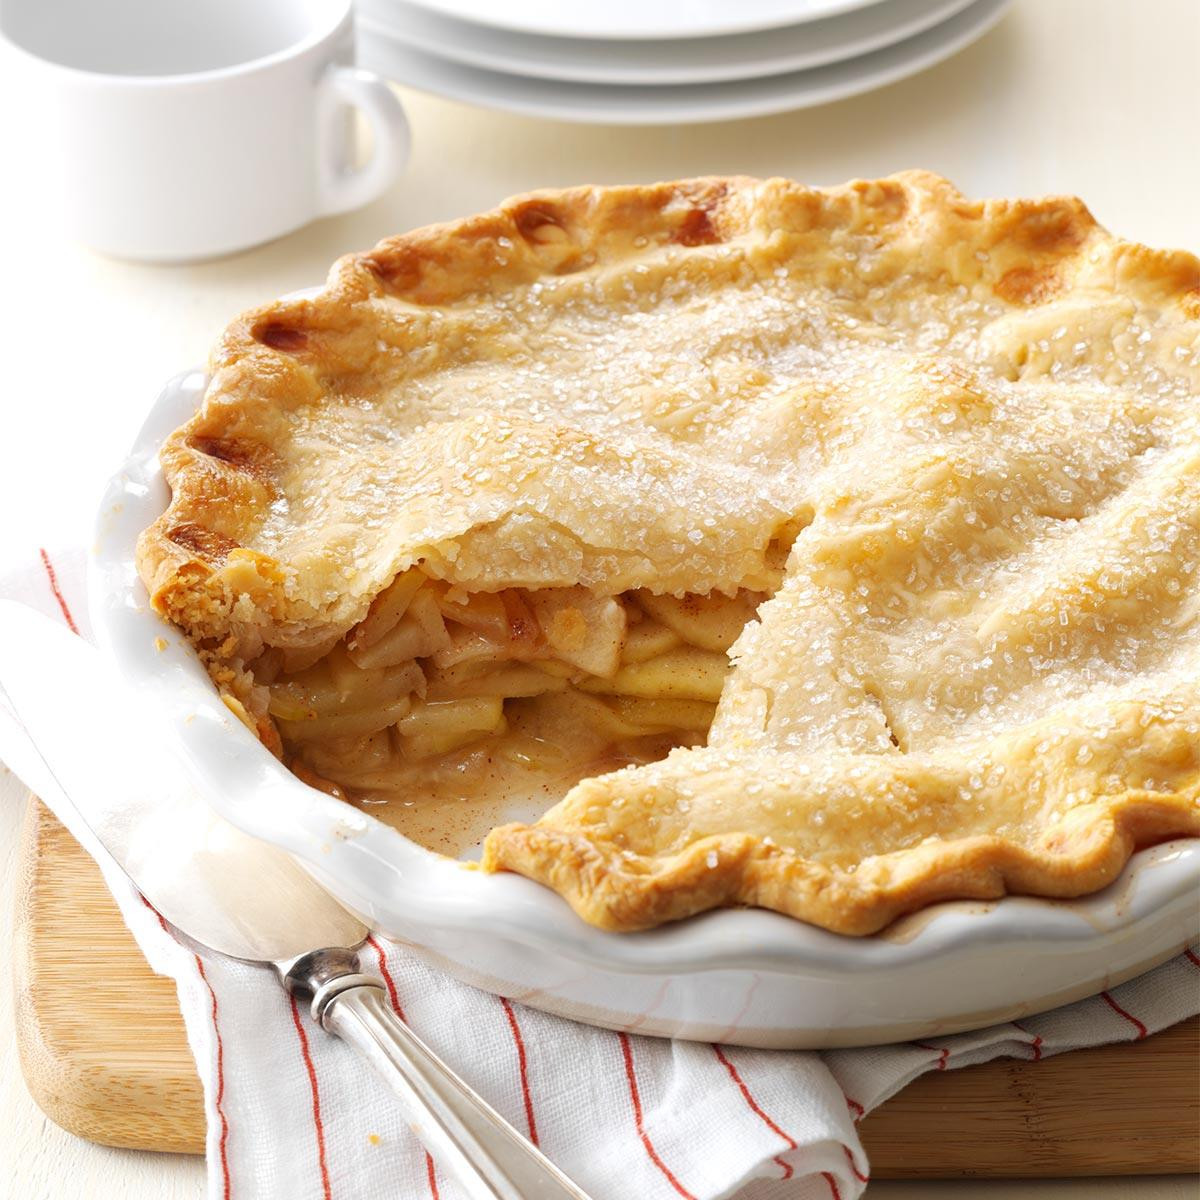 How To Make Apple Pie
 Classic American Pie Recipes